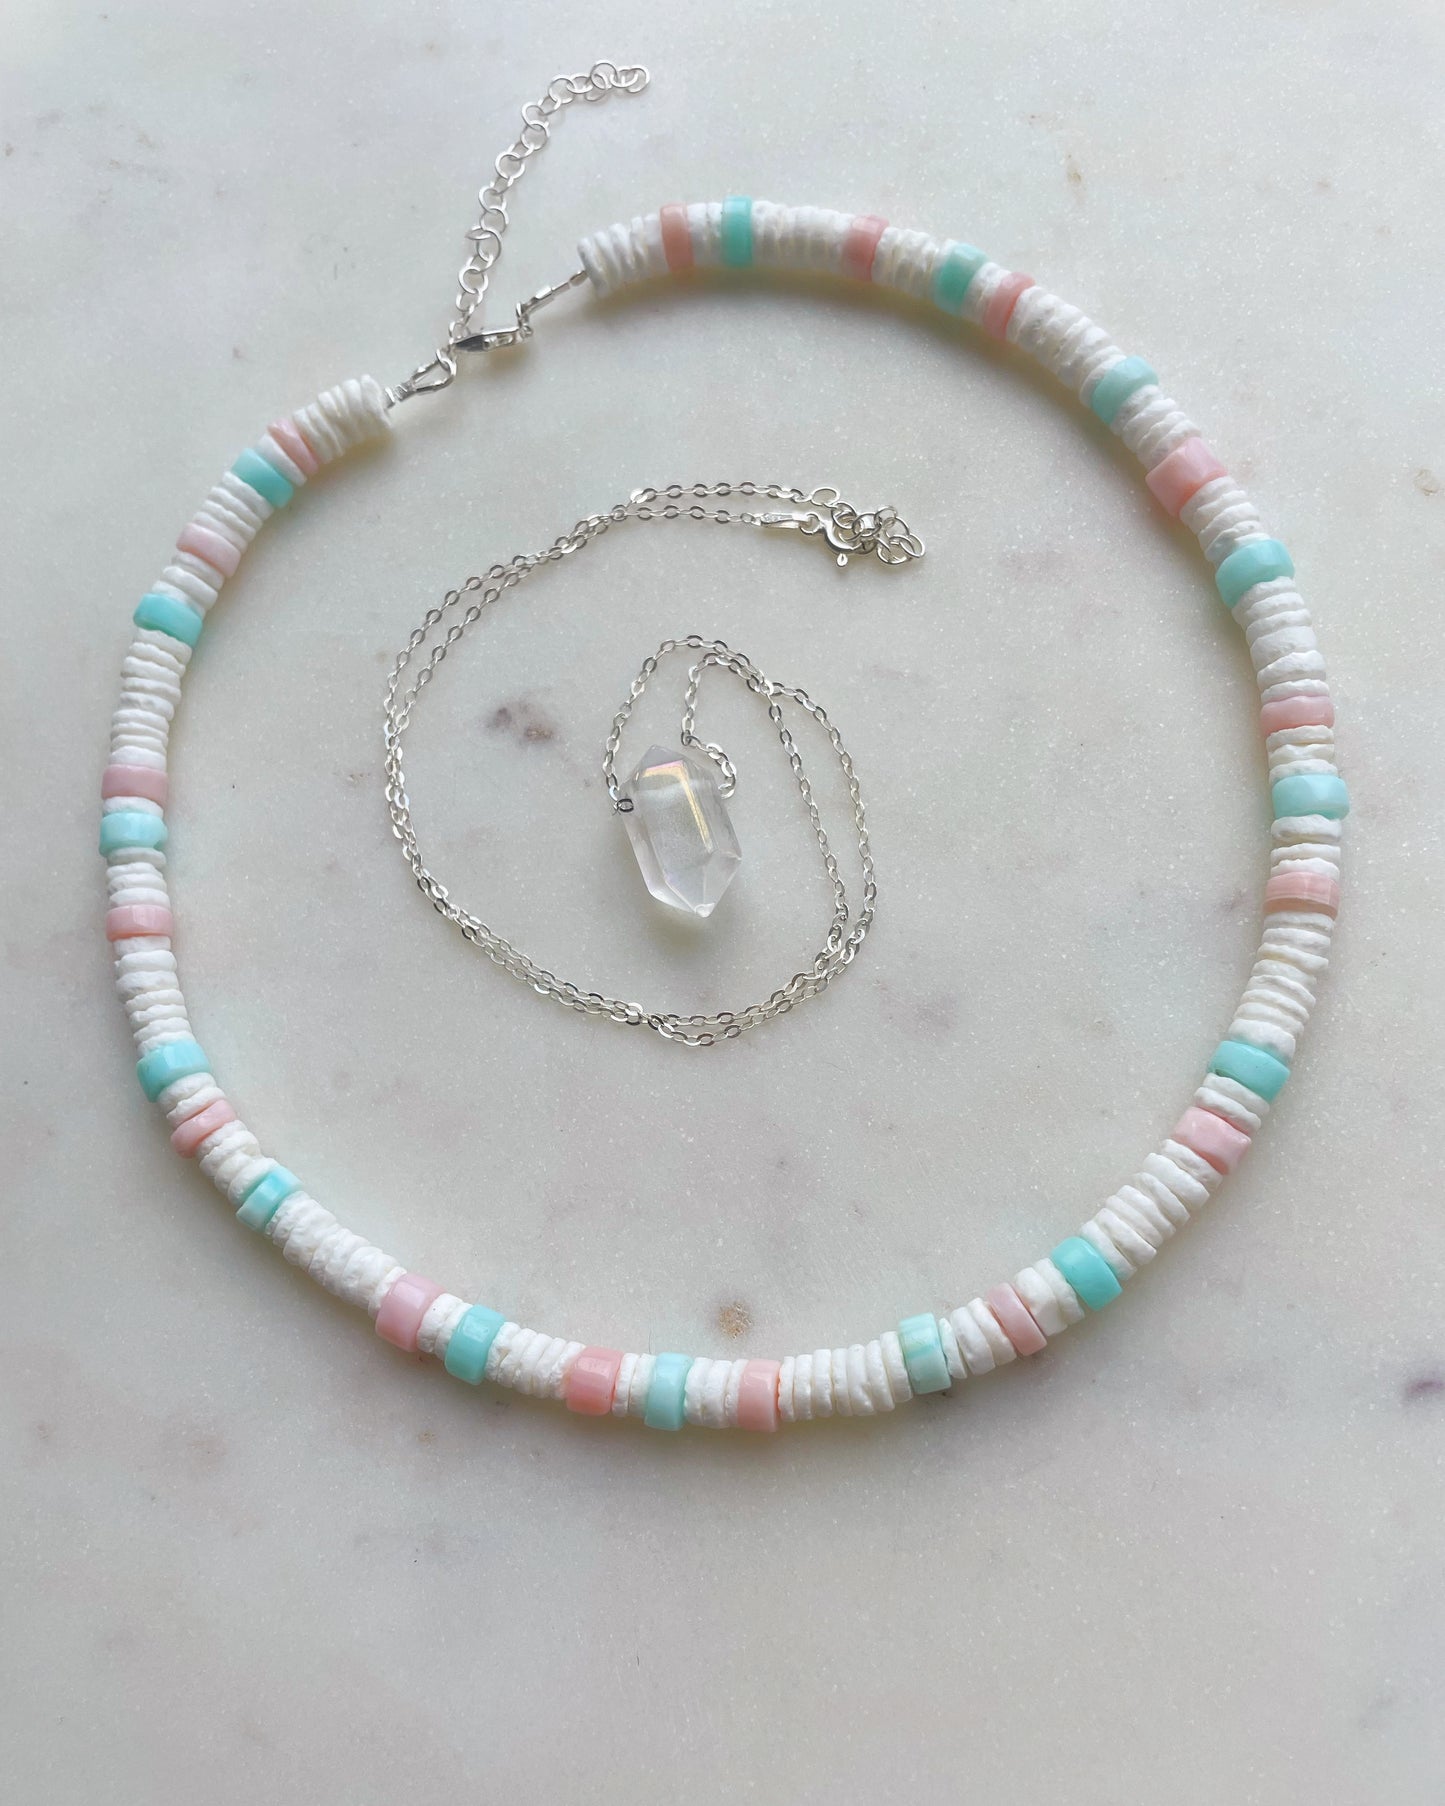 Cotton Candy necklace